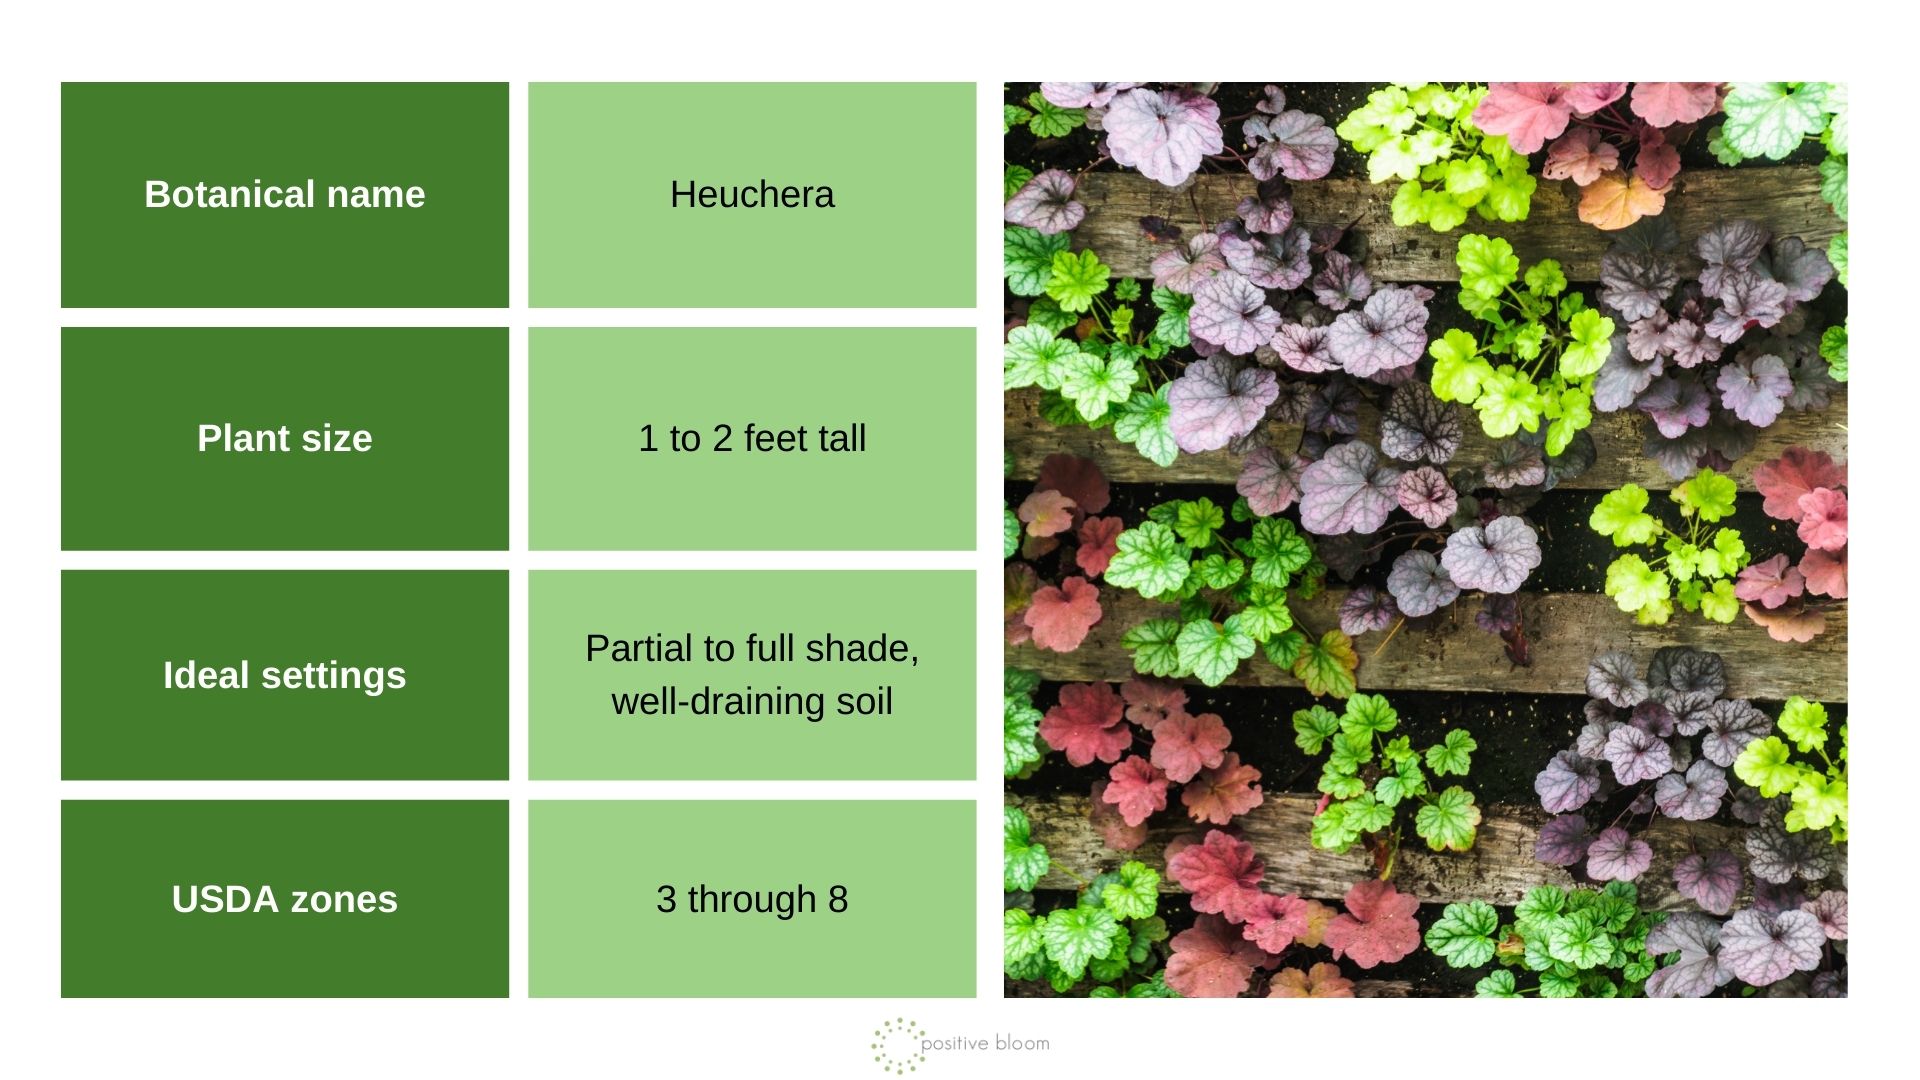 Coral Bells info chart and photo